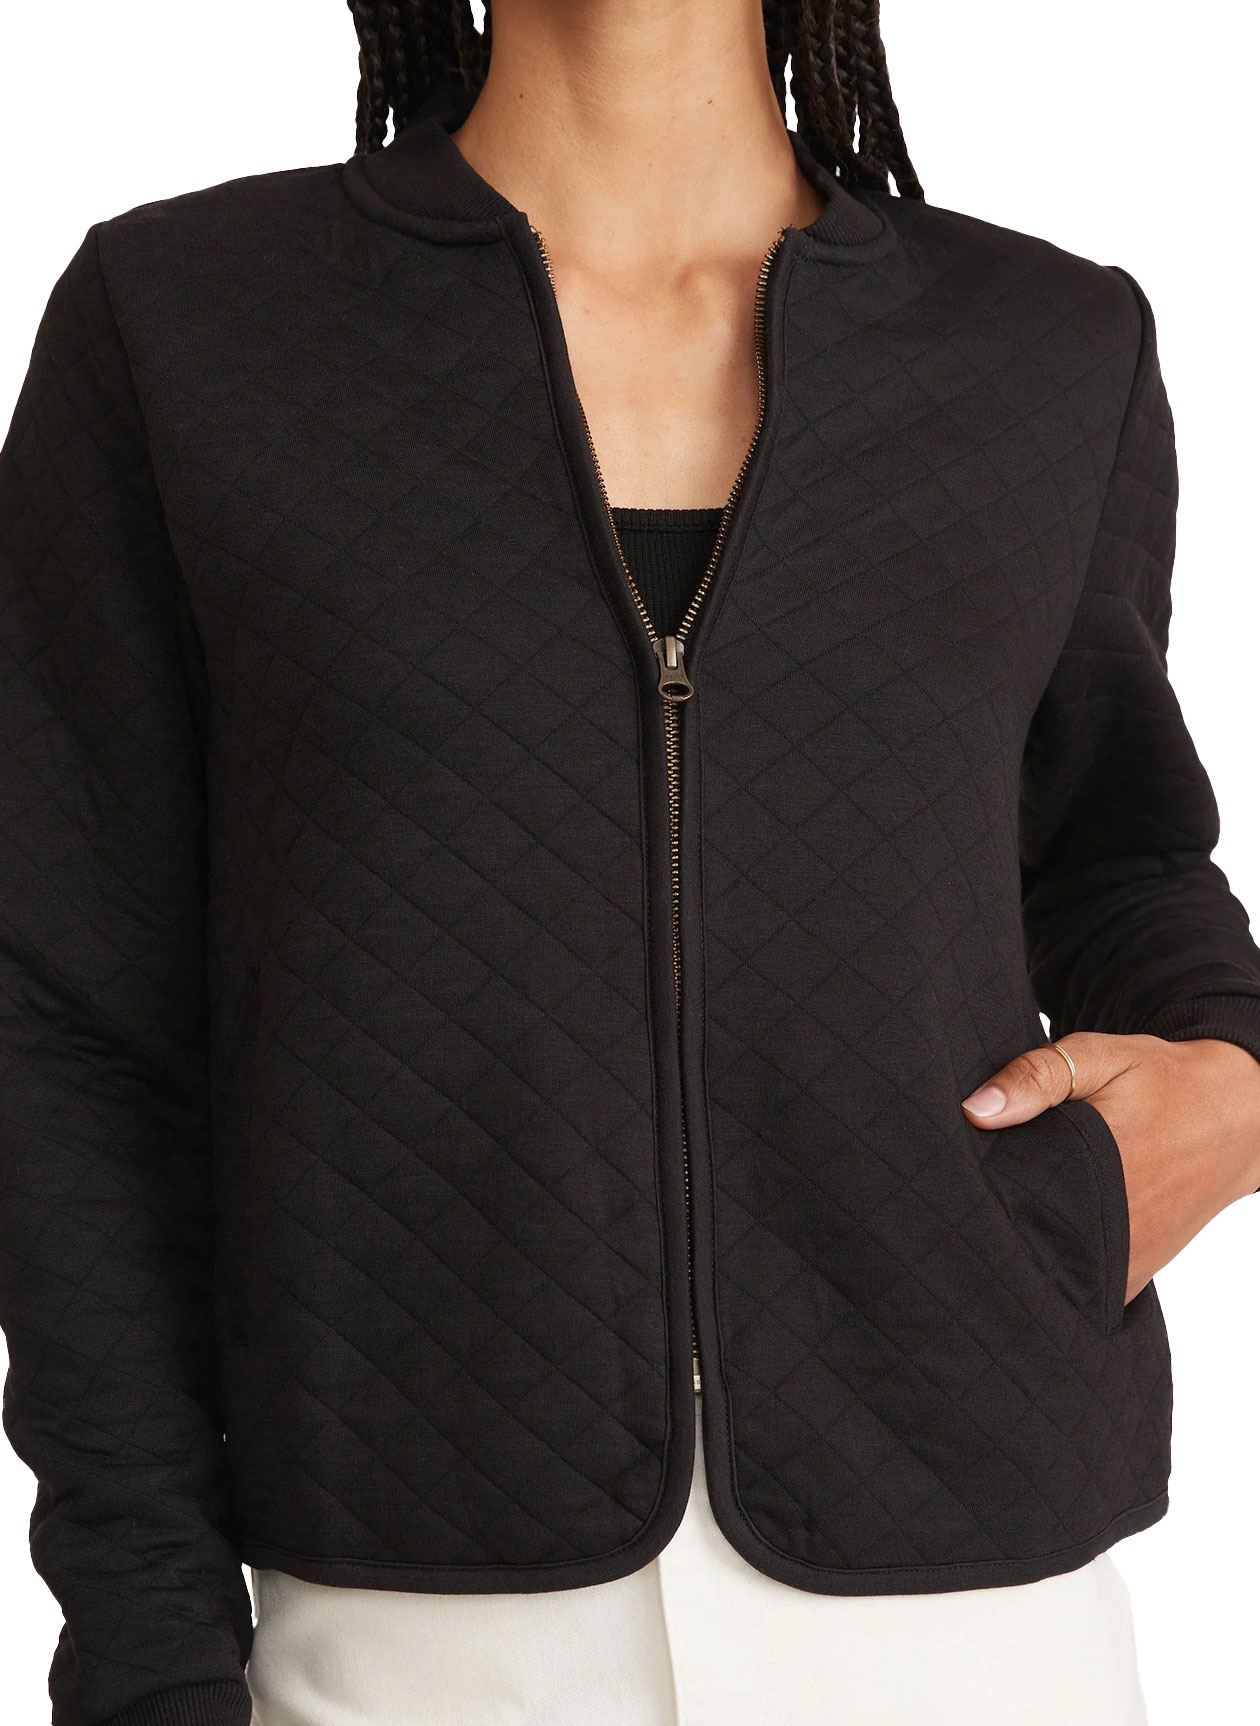 Marine Layer Women's Black Corbet Quilted Bomber Jacket